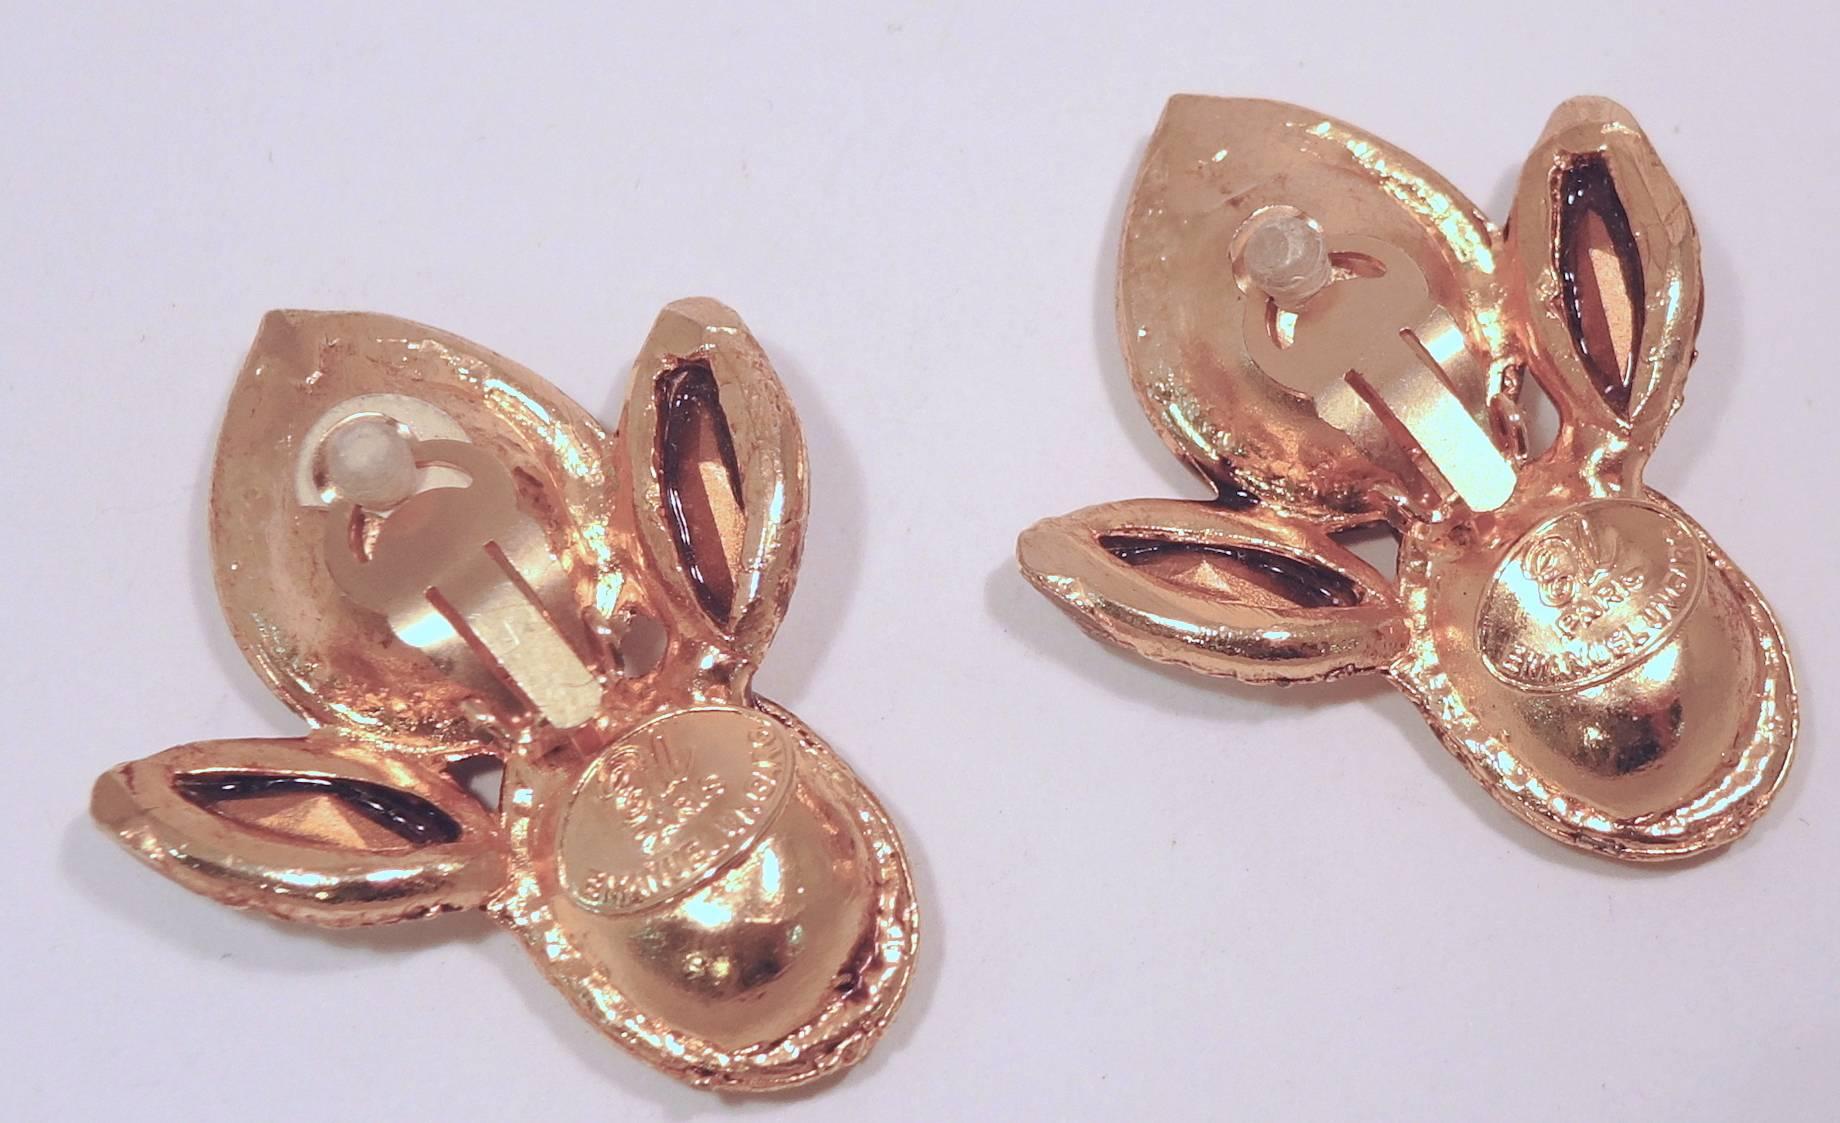 These beautiful clip earrings by Emanuel Ungaro are designed with four crystals embedded in gold tone frames. They measure 2-1/4” x 1-3/8” and are signed “Emanuel Ungaro Paris”. They are in excellent condition.